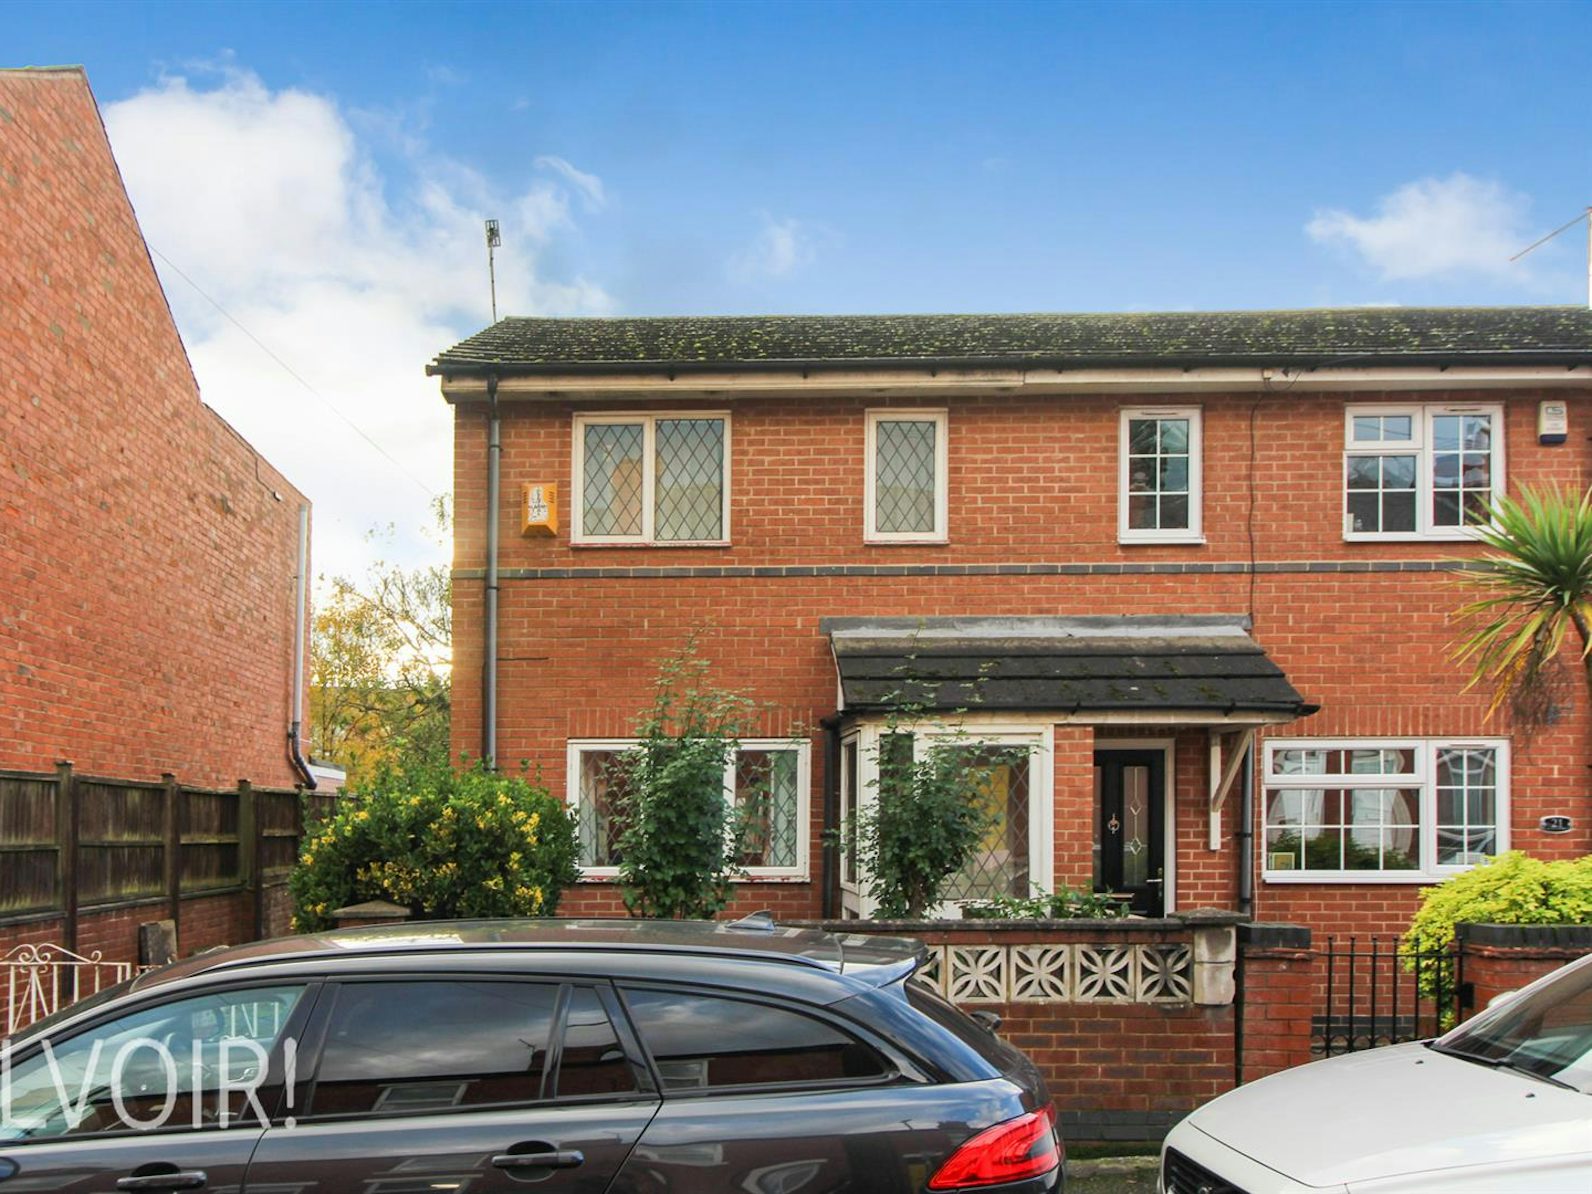 Semi-detached house for sale on Muriel Street Nottingham, NG6